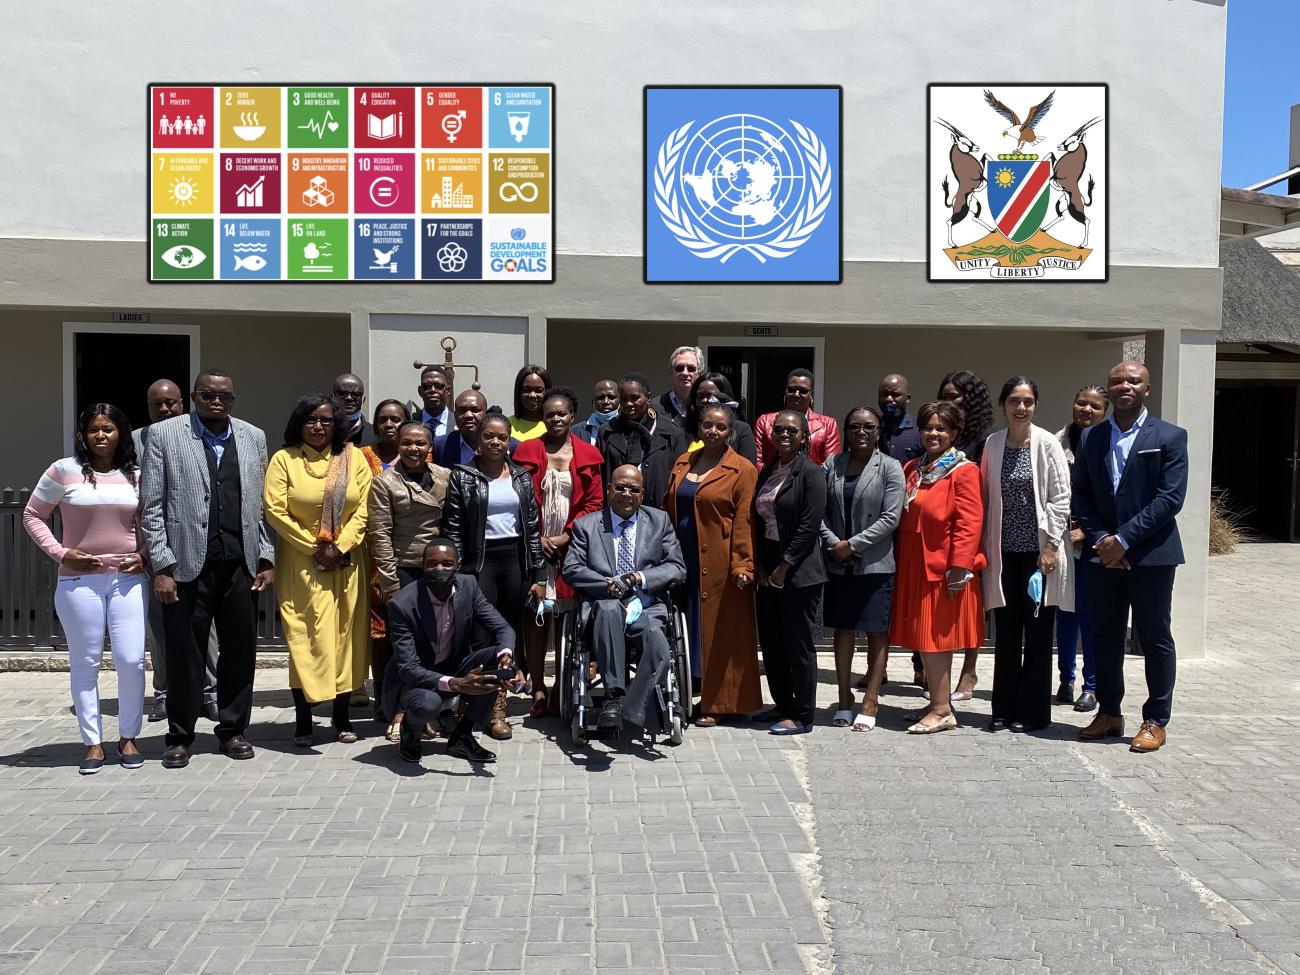 Officials gather for a photo. The UN logo and Namibian coat of arms are imposed above. 